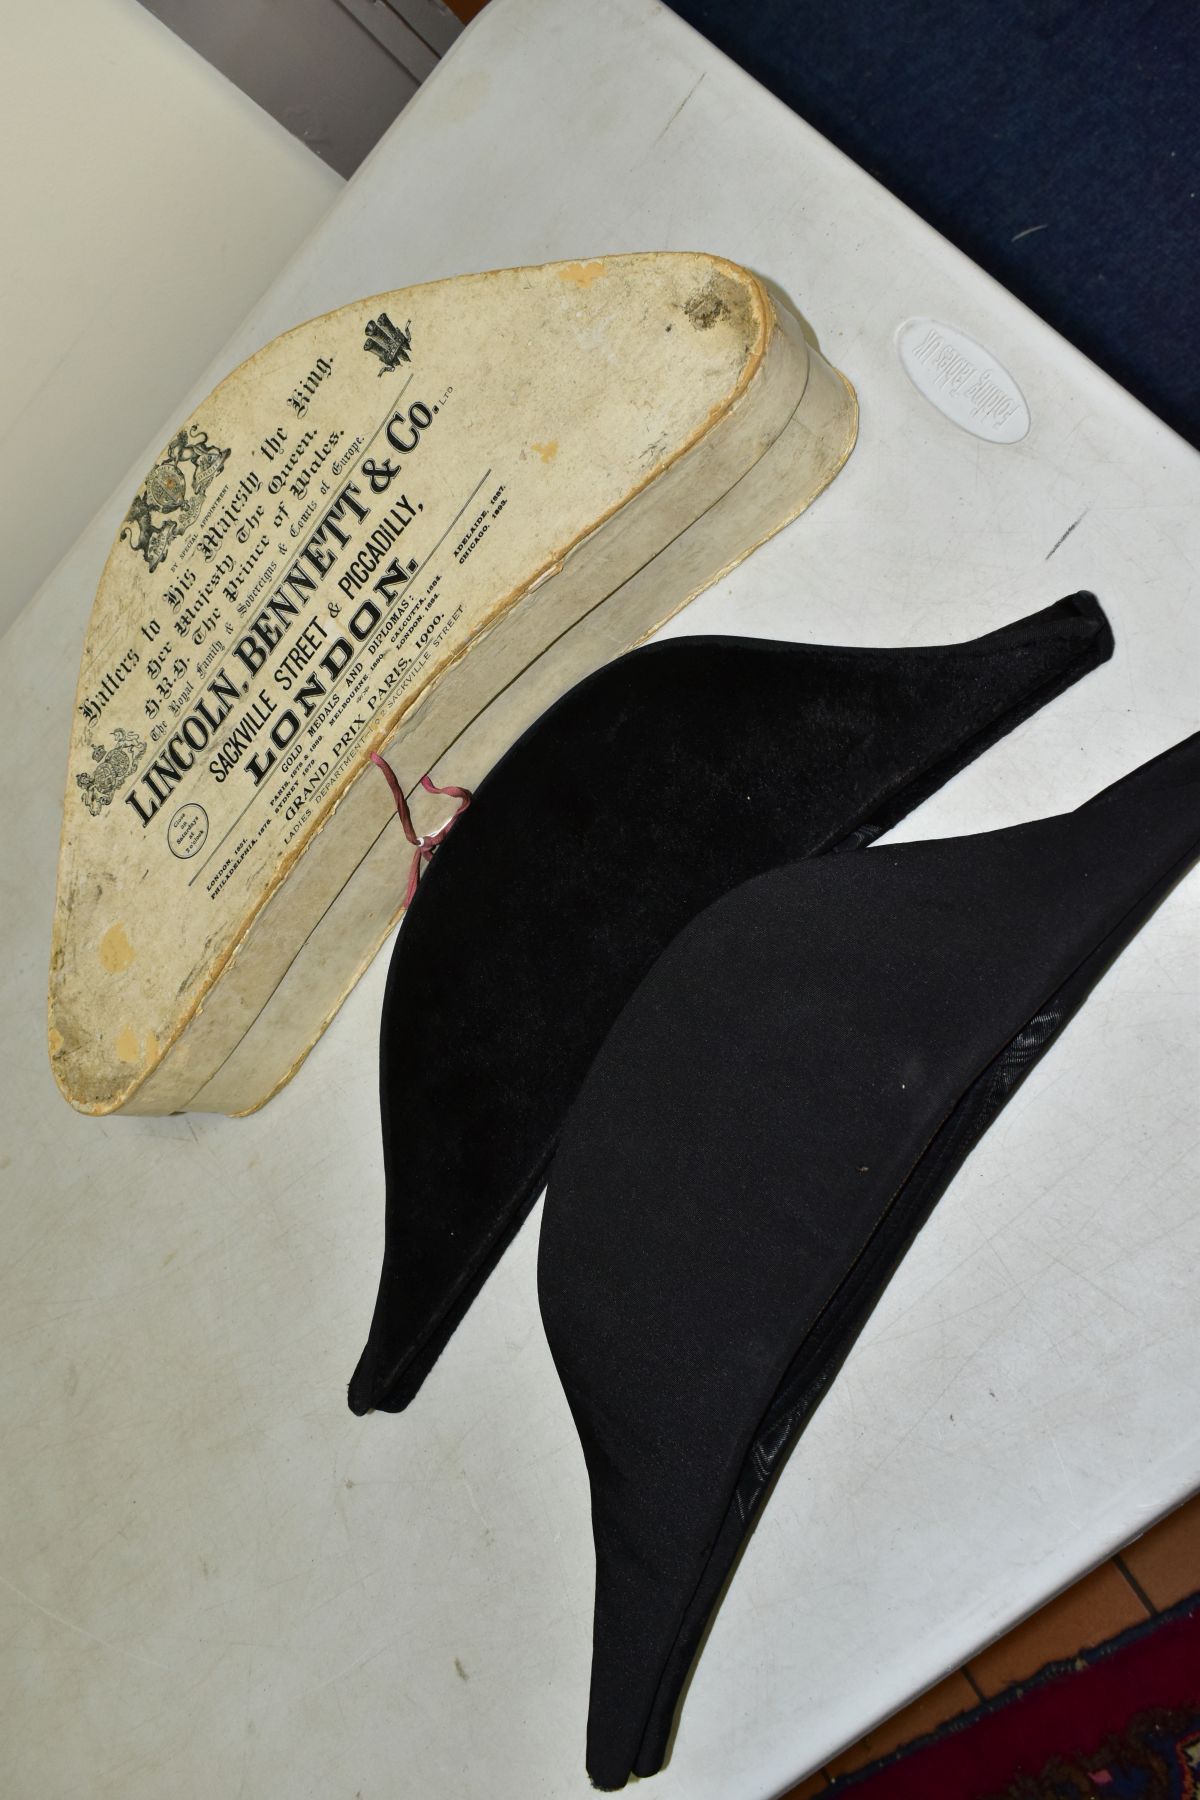 A BICORN HAT BY LINCOLN, BENNETT & CO, together with hat box with printed information for Lincoln - Image 6 of 6